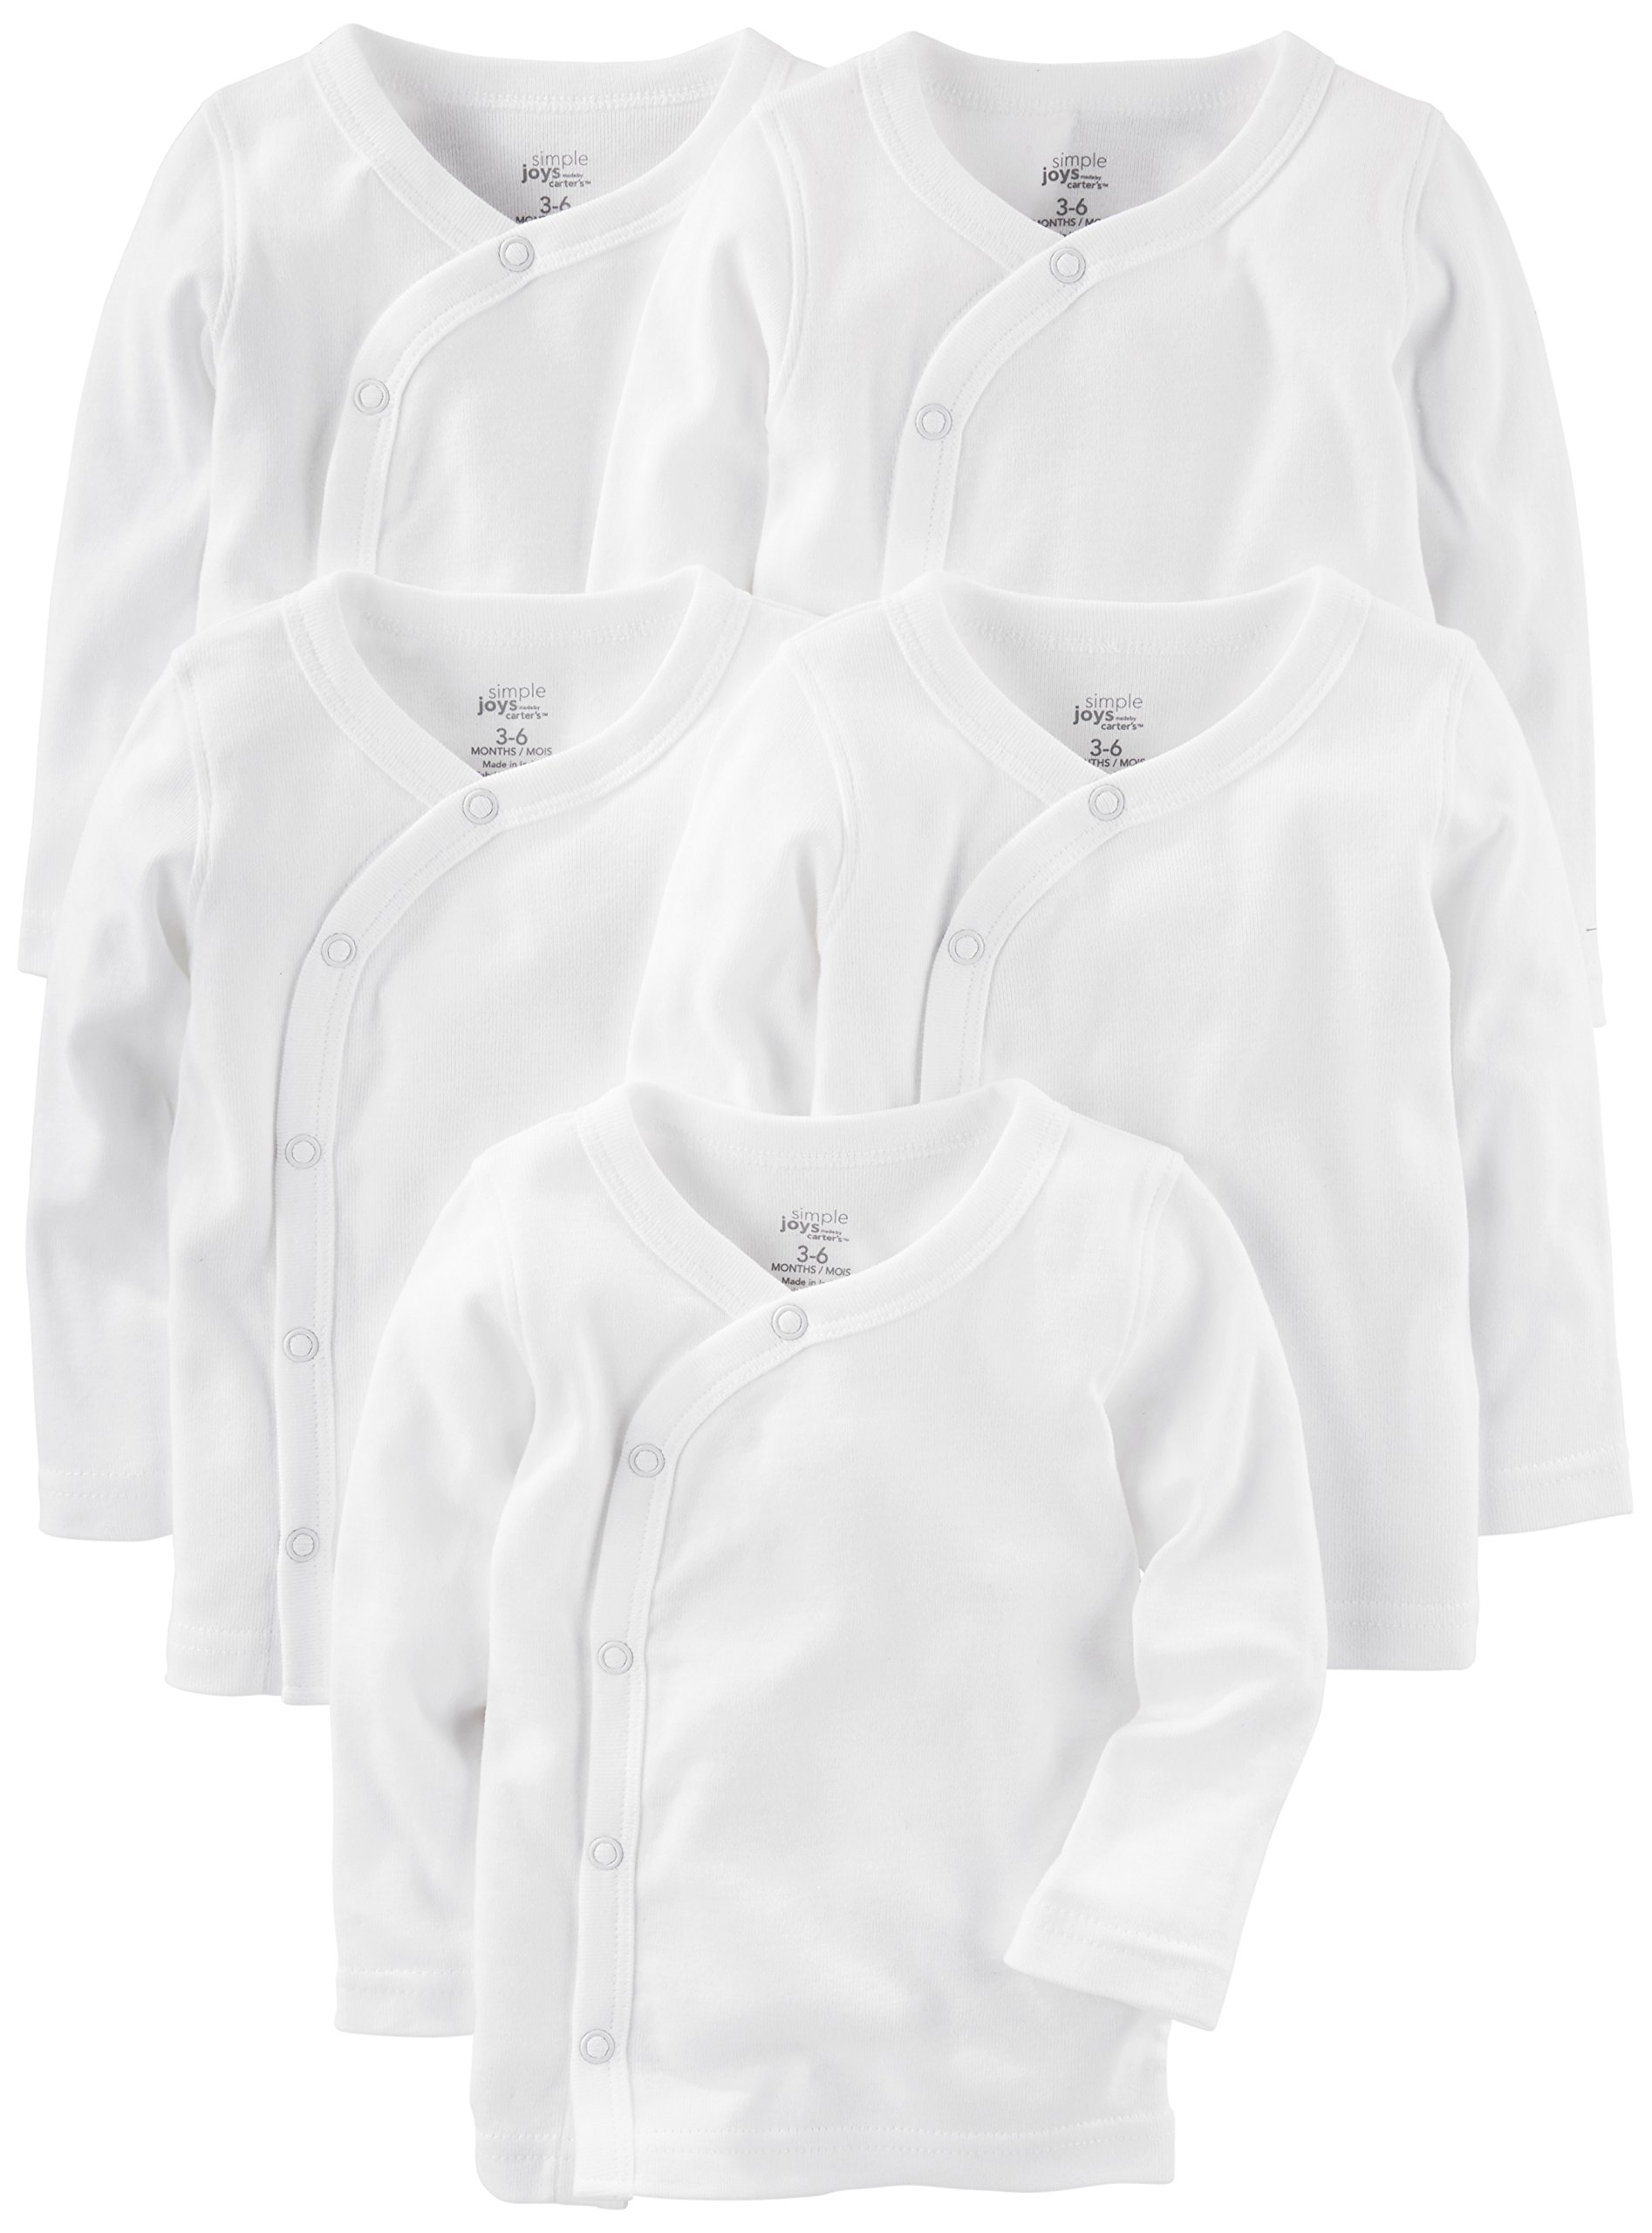 Simple Joys by Carter's Unisex Babies' Side-Snap Long-Sleeve Shirt, Pack of 5